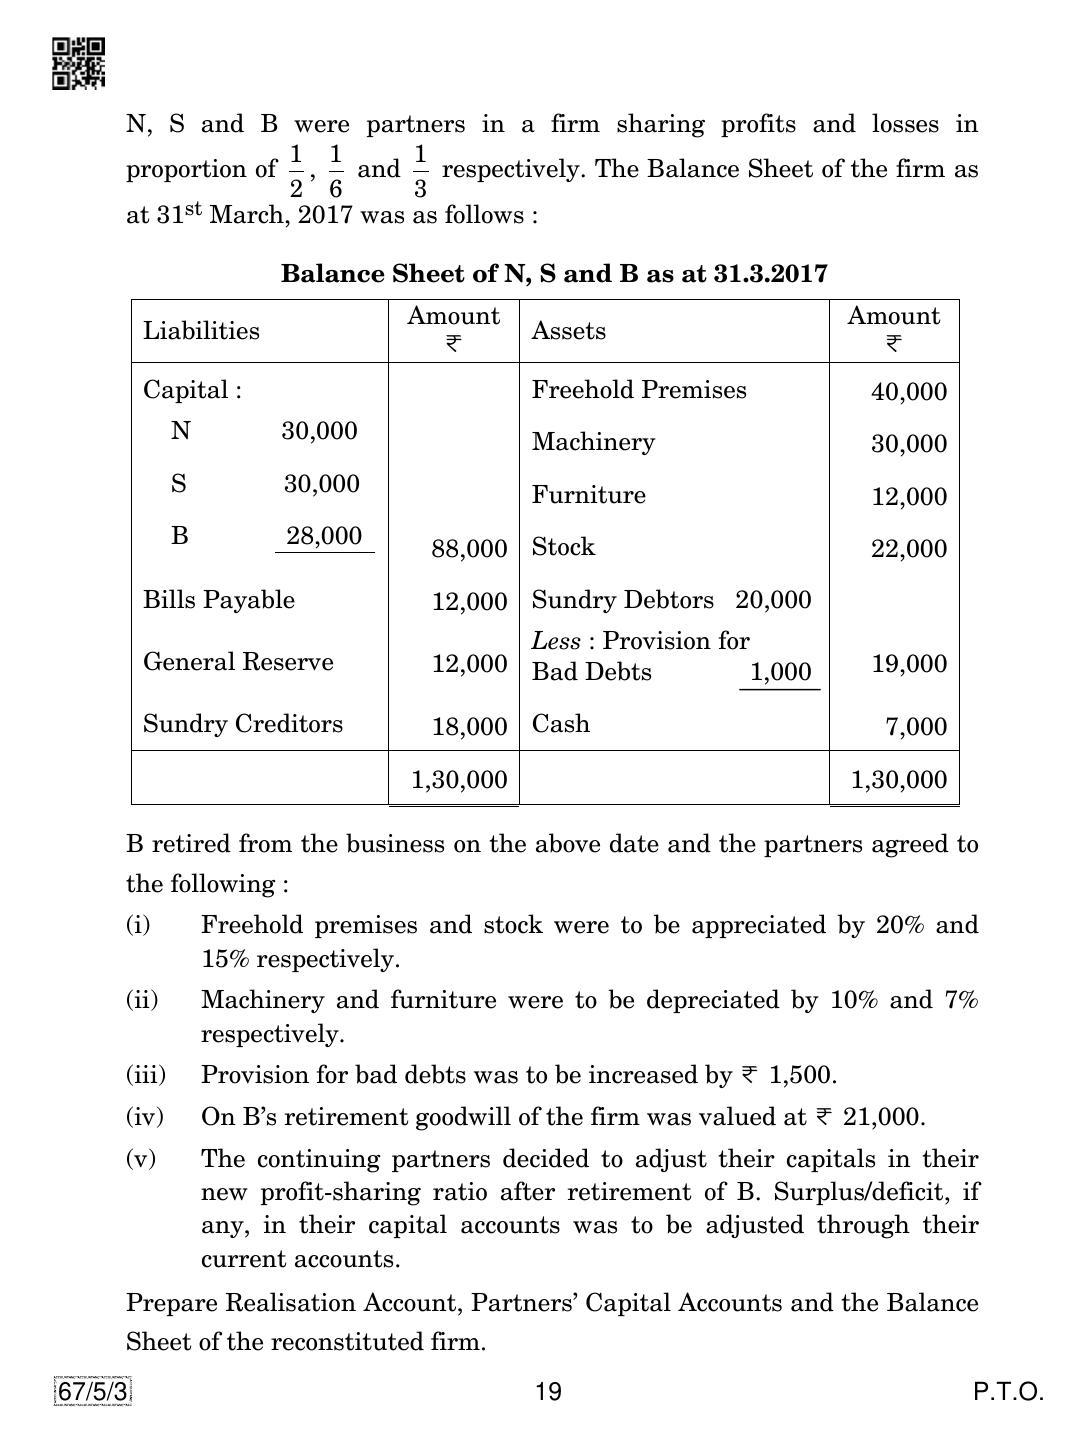 CBSE Class 12 67-5-3 Accountancy 2019 Question Paper - Page 19